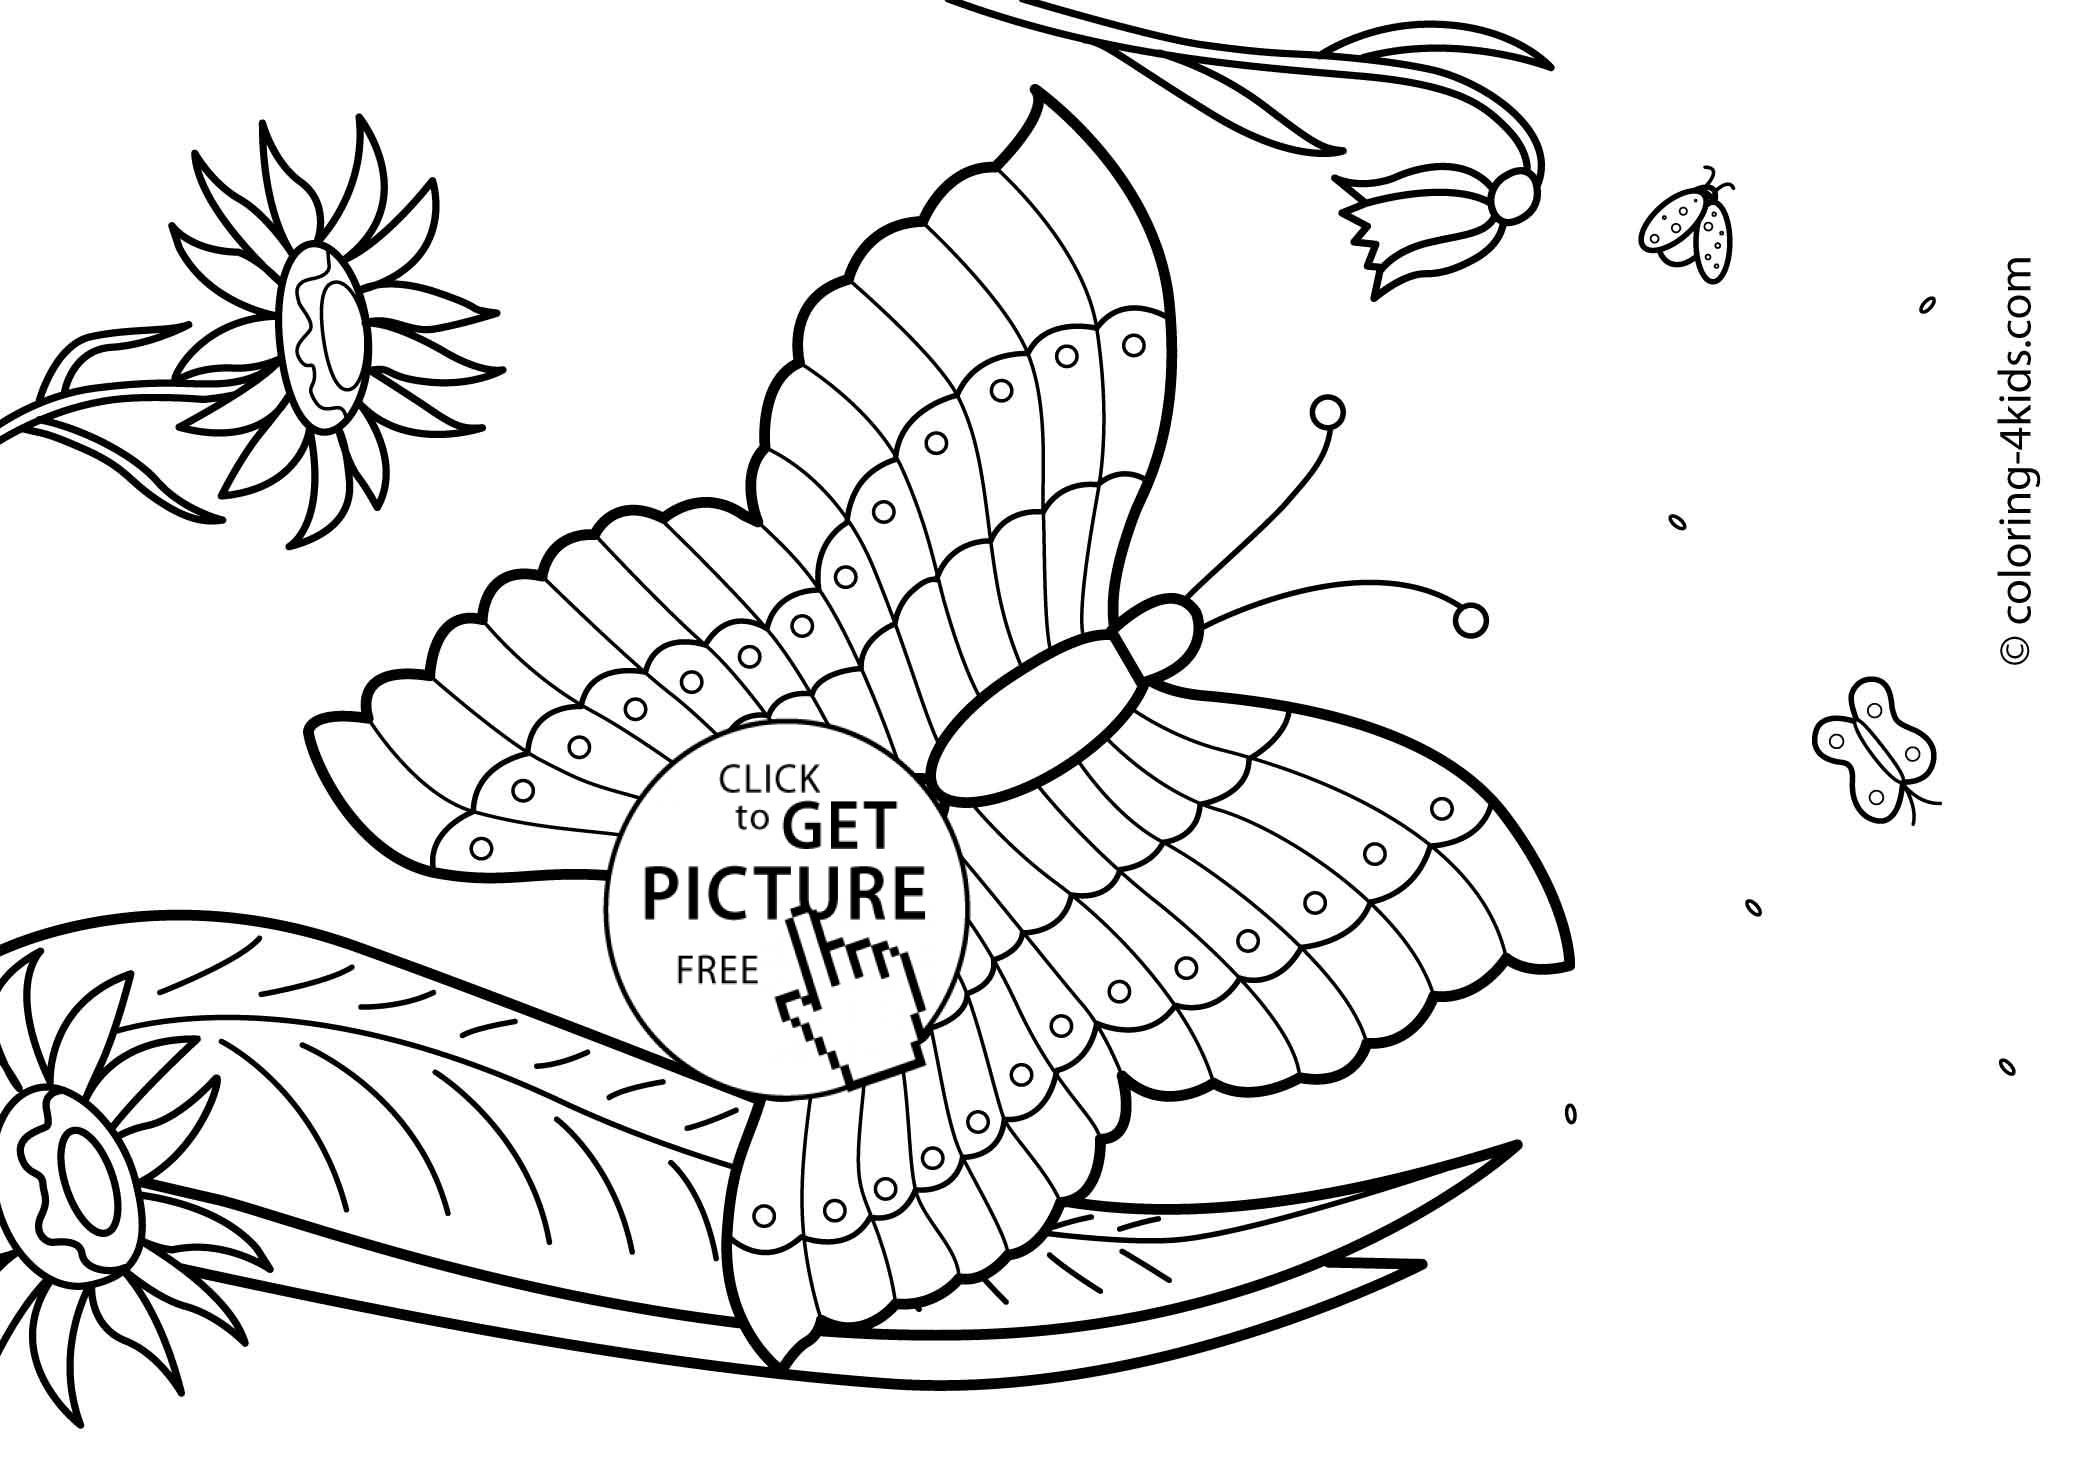 Butterfly Summer coloring pages for kids, free, printable